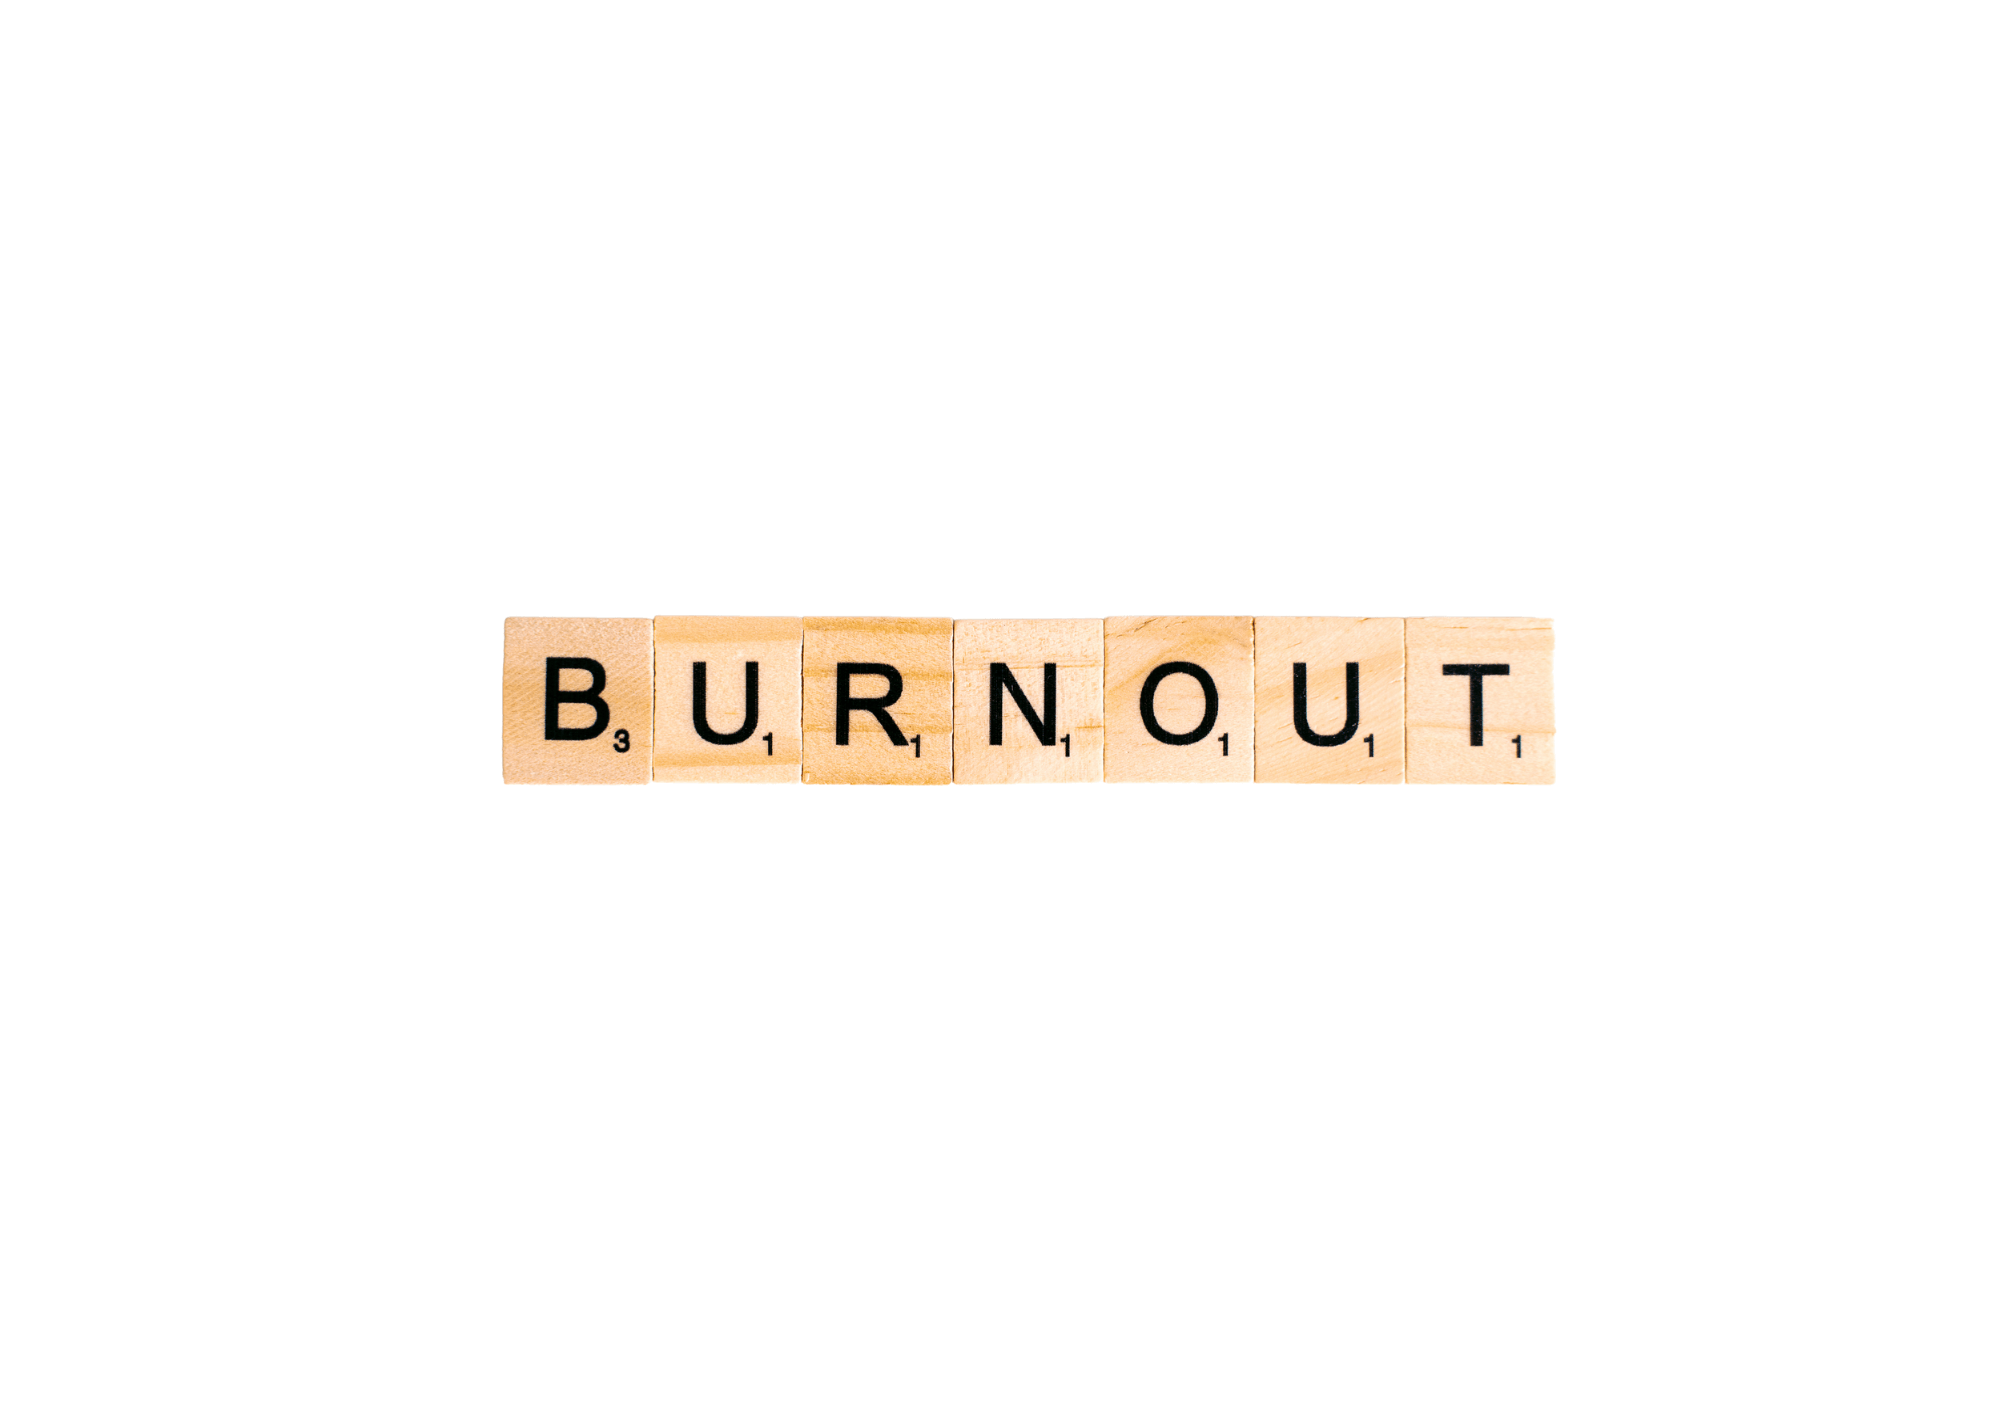 Word BURNOUT spelled out.